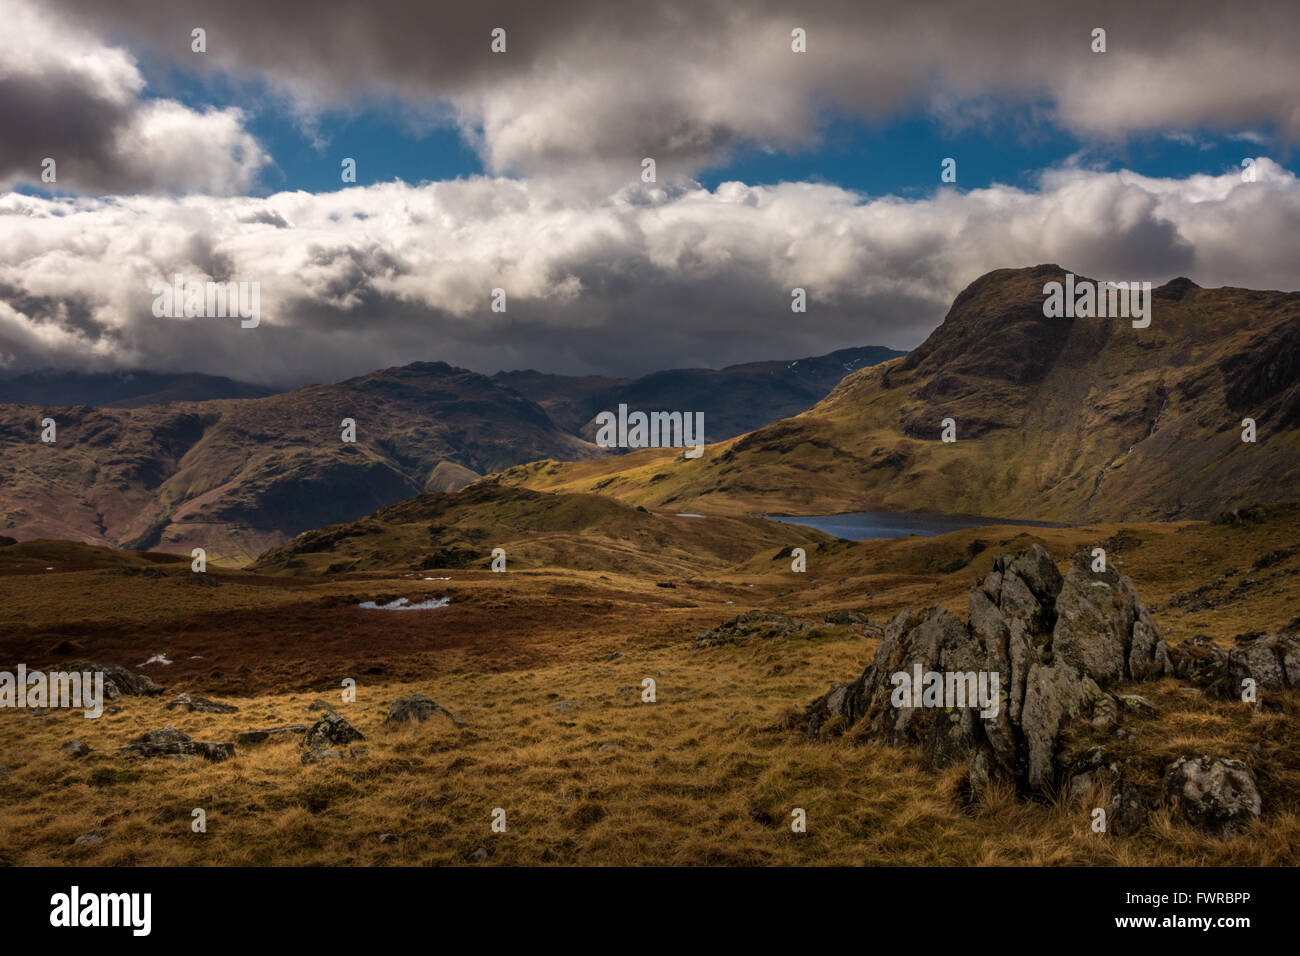 The Langdales from Blea Rigg (including Stickle Tarn and Harrison Stickle), heading up Sergeant's Man, The Lake District, England Stock Photo